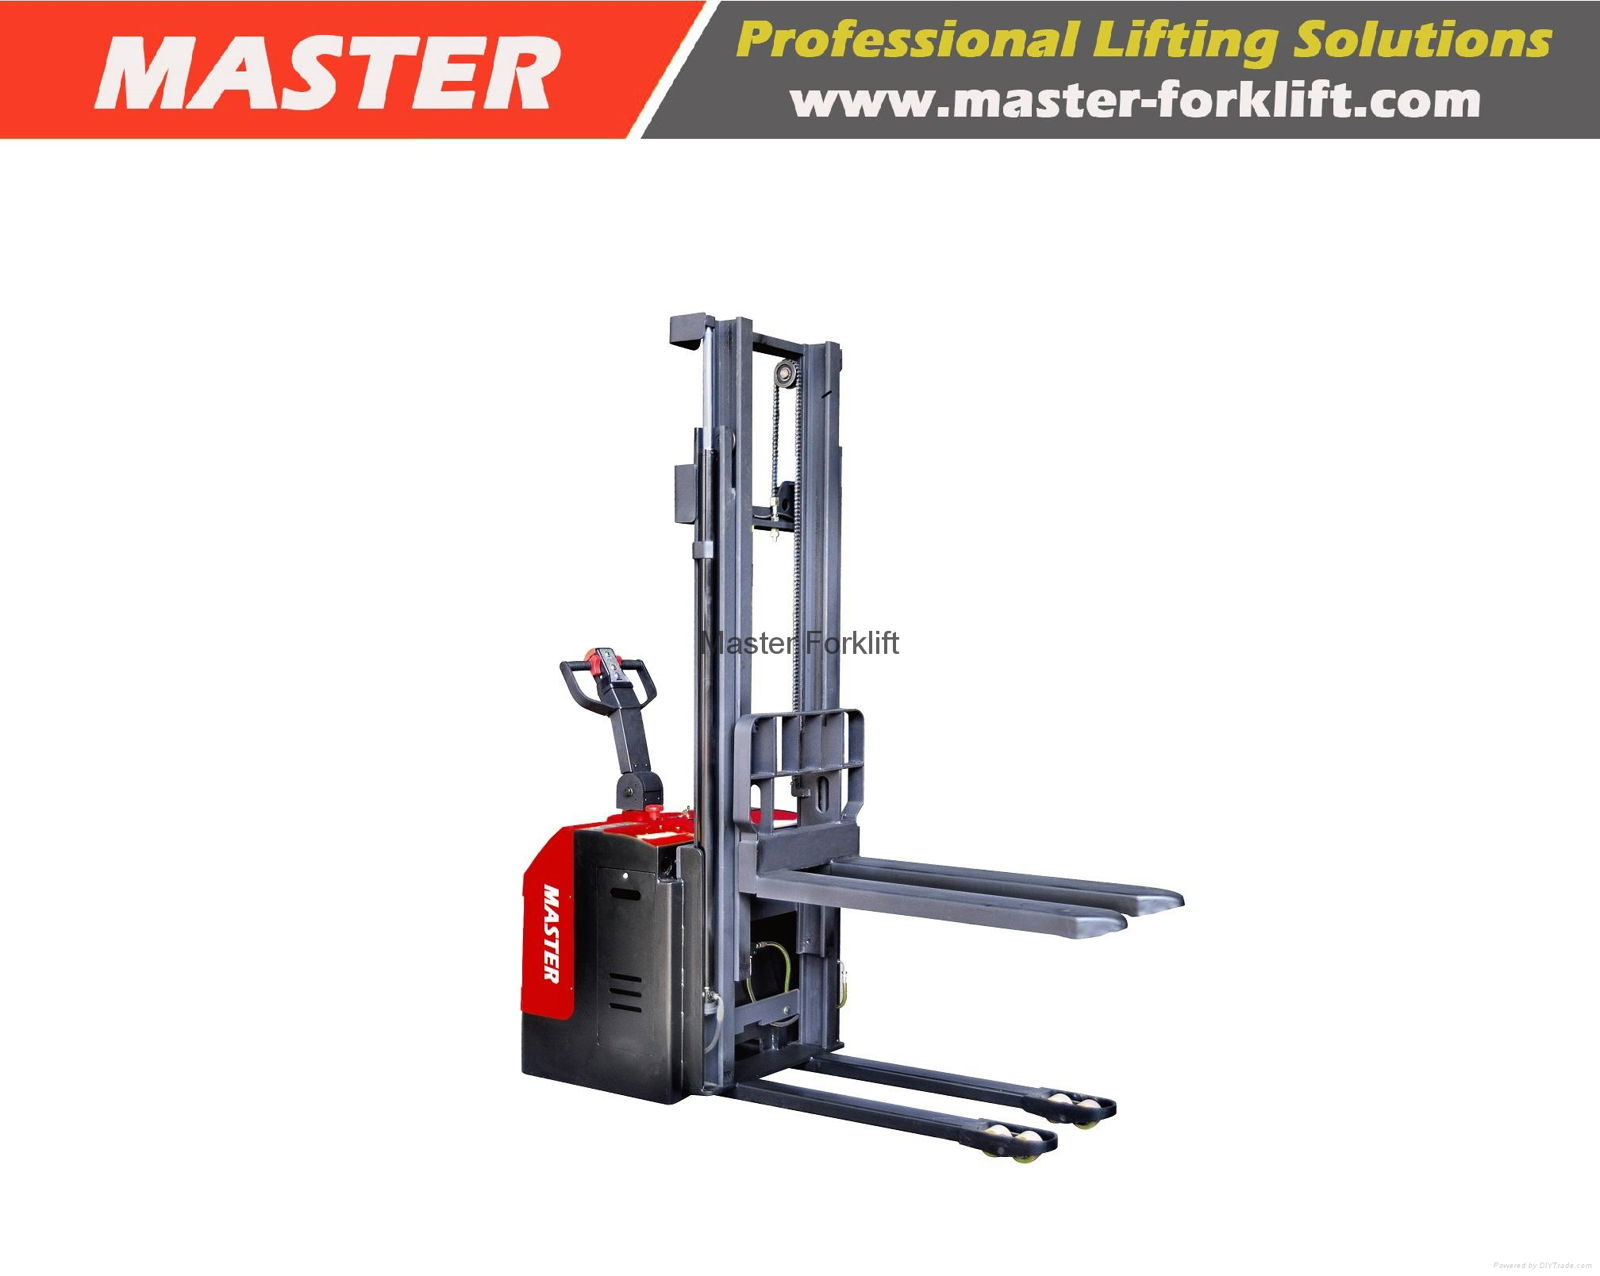 Master Forklift - 1.0-1.5 ton Electric Stacker